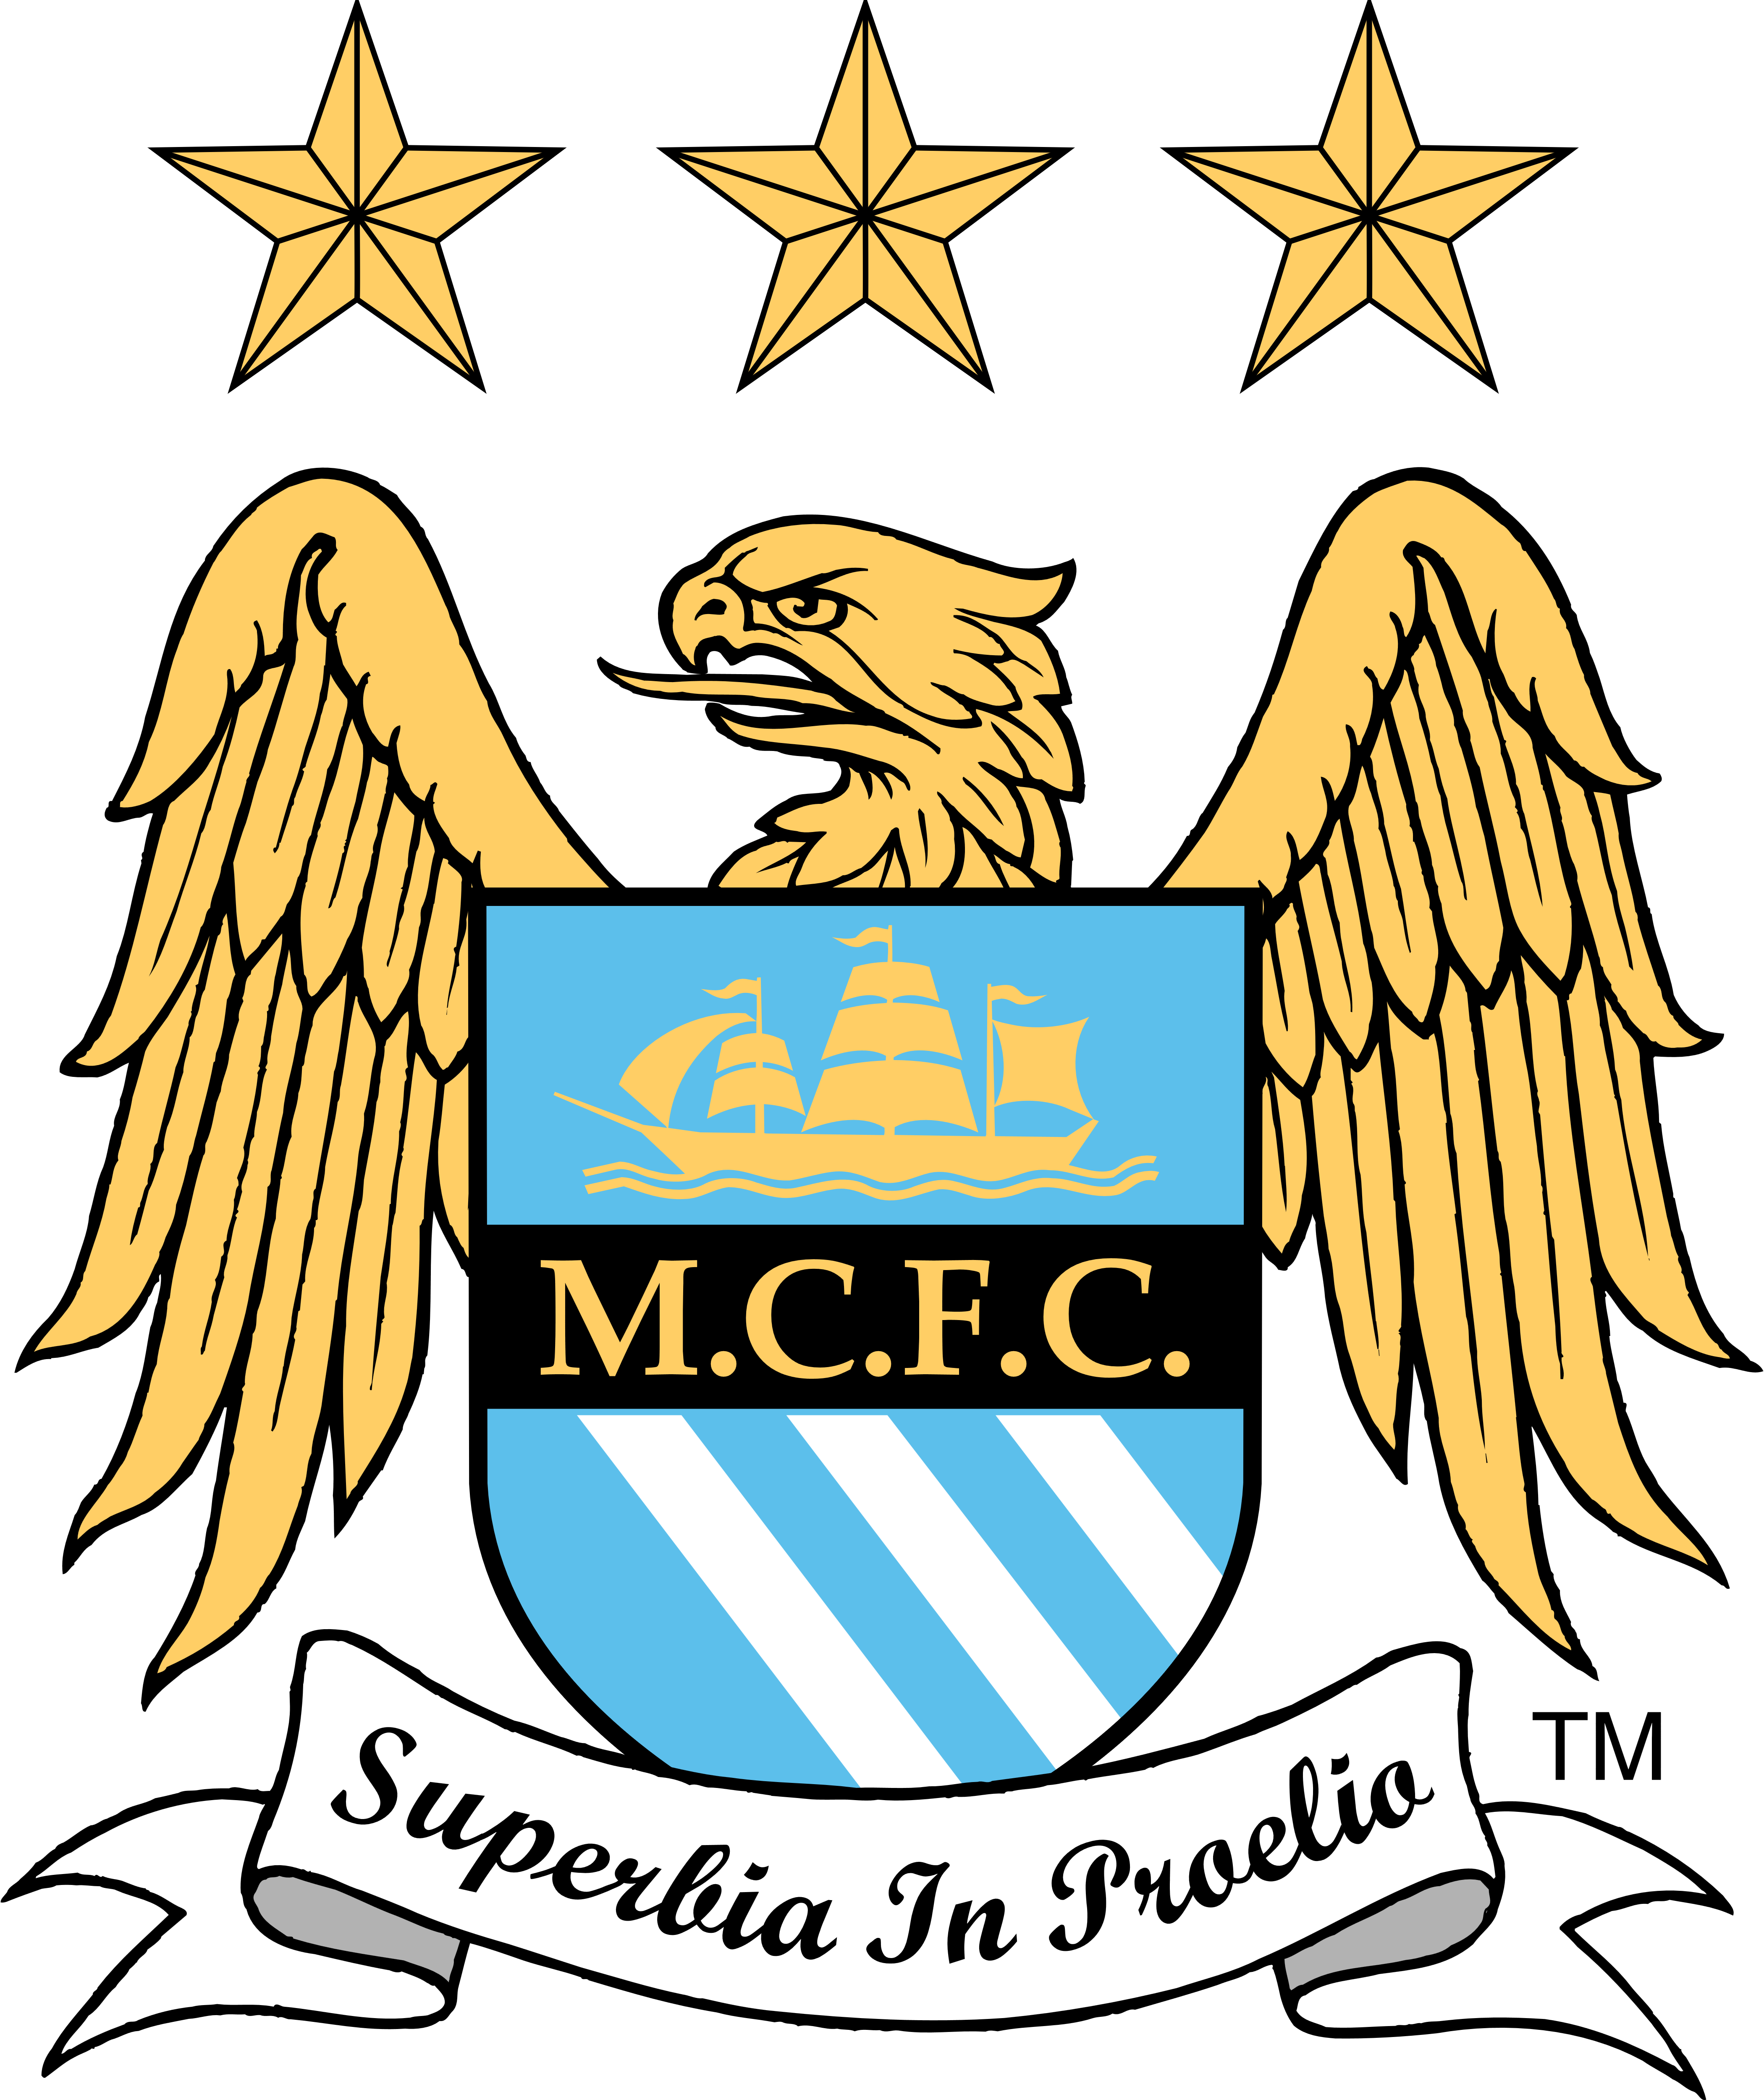 Manchester City Fc Logos Download